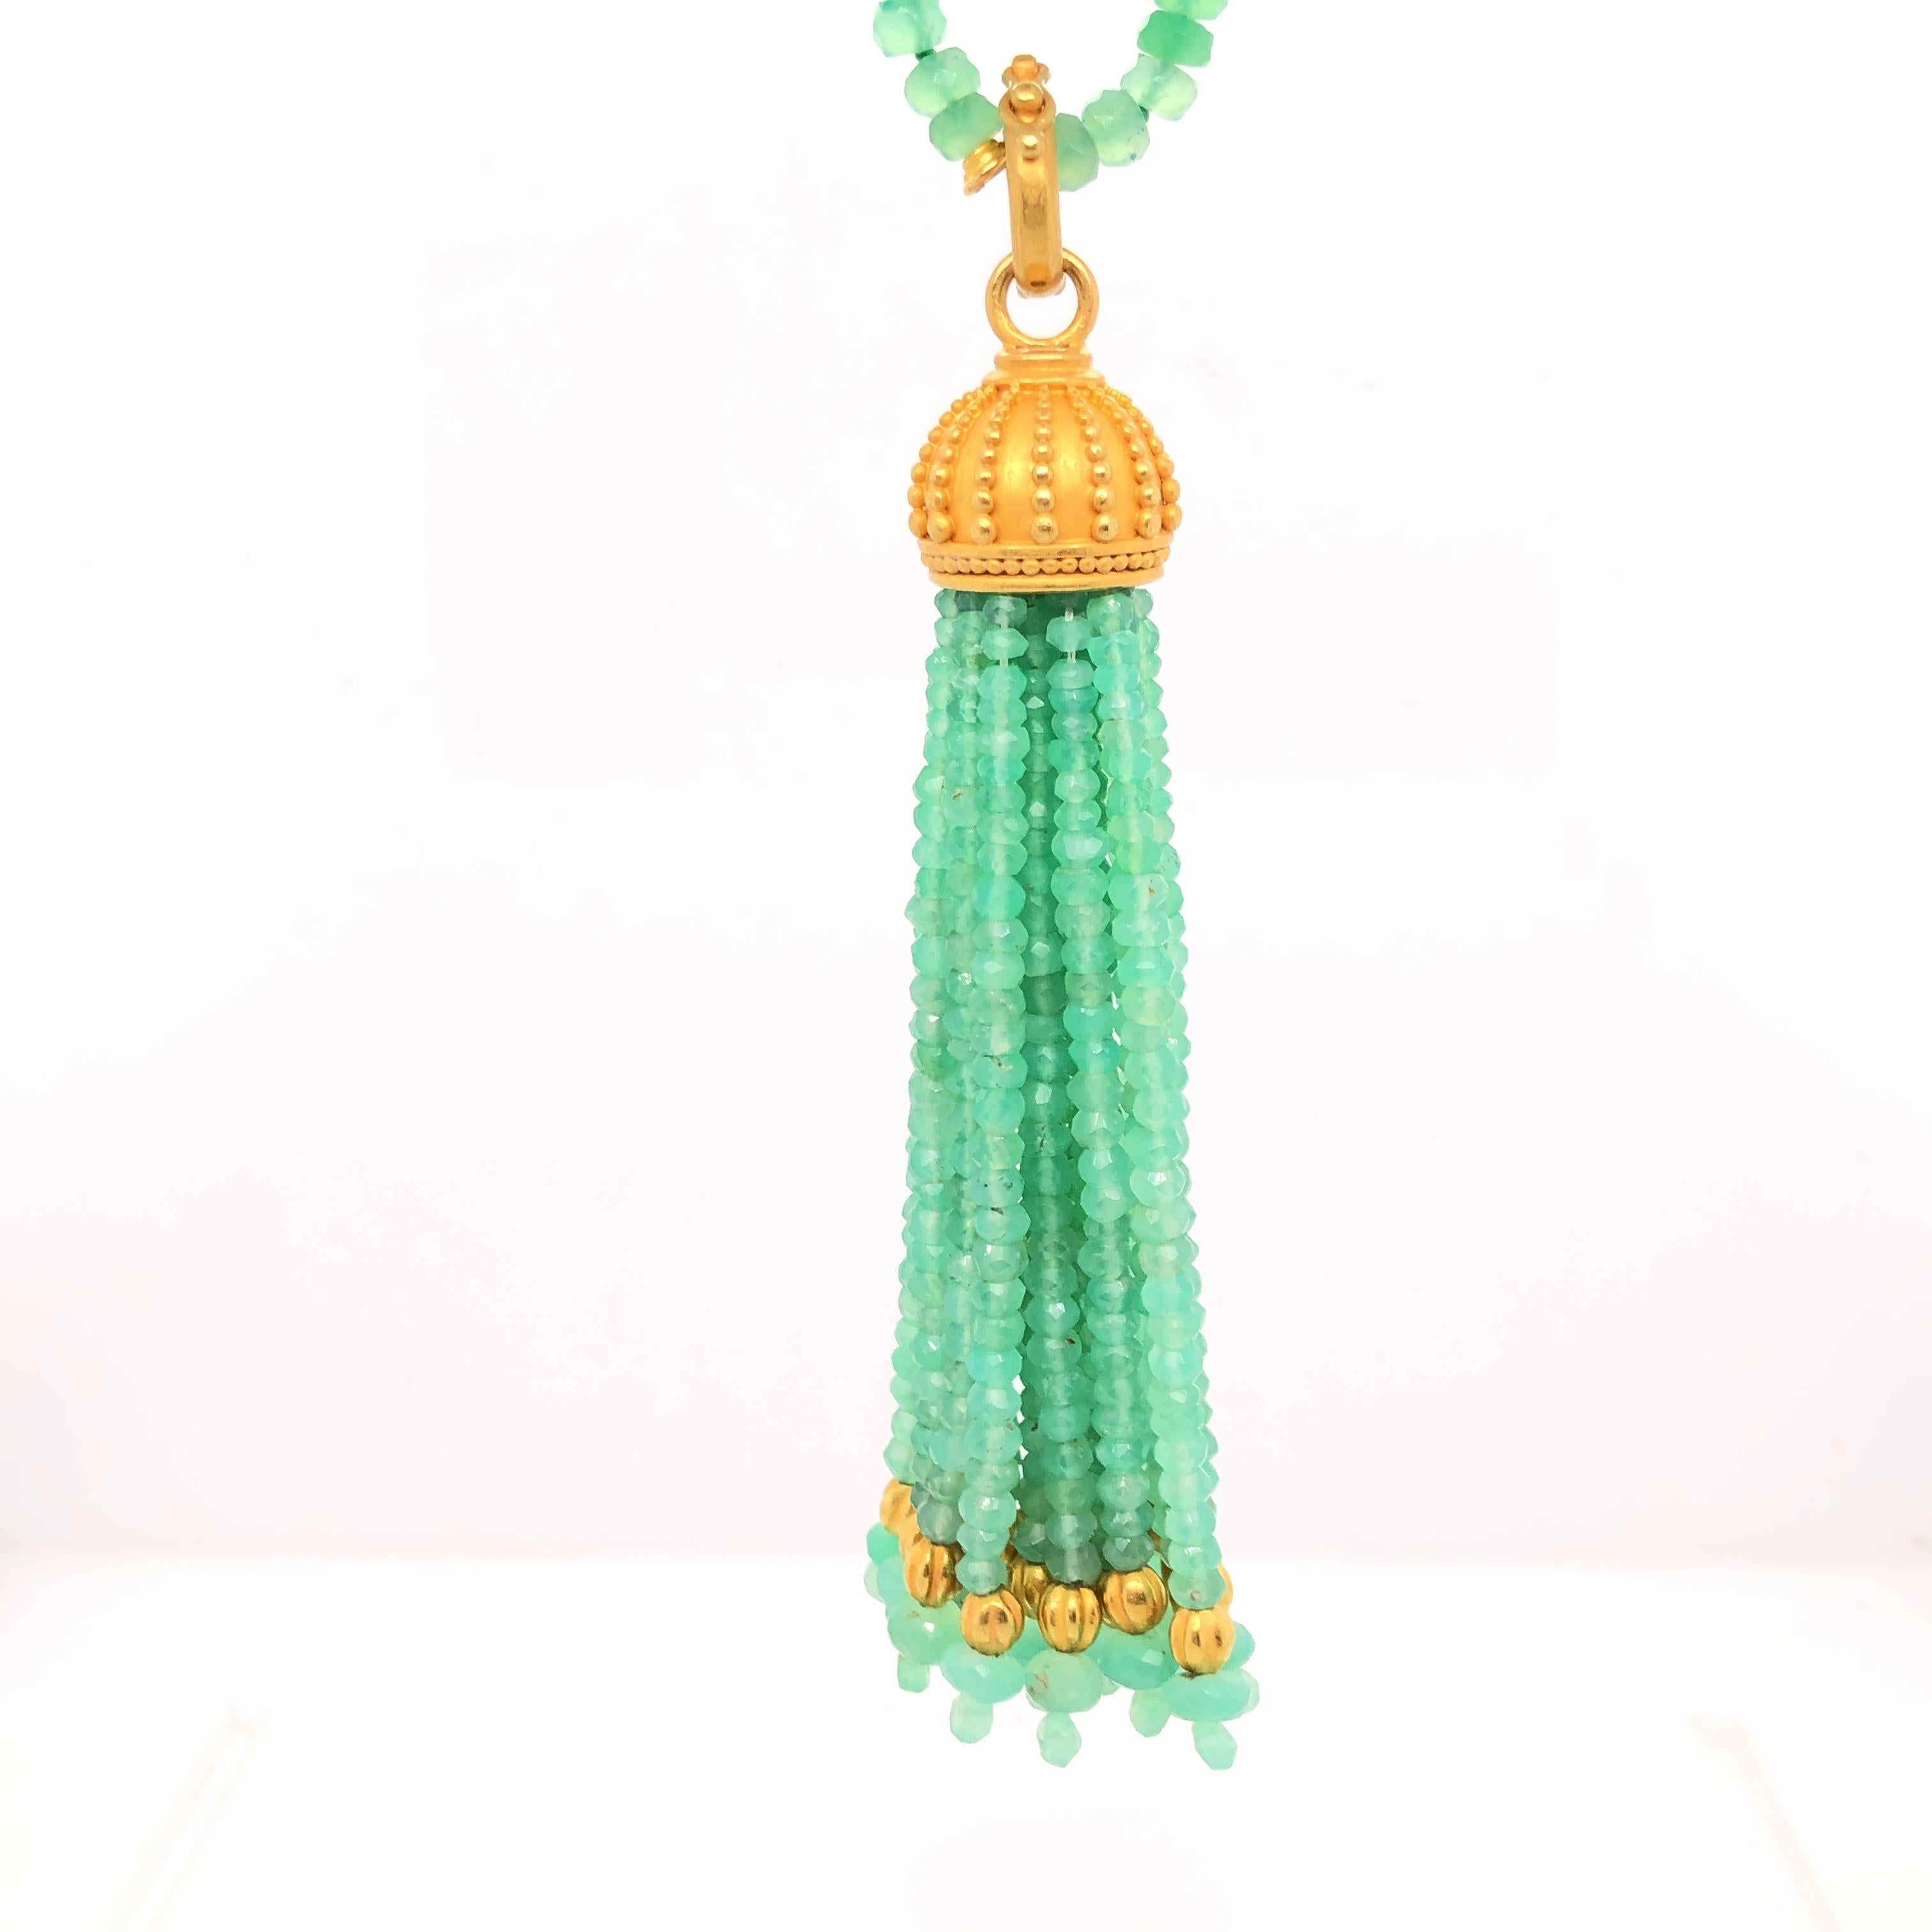 Contemporary Carolyn Tyler Chysophrase Lola Necklace and Urchin Tassel